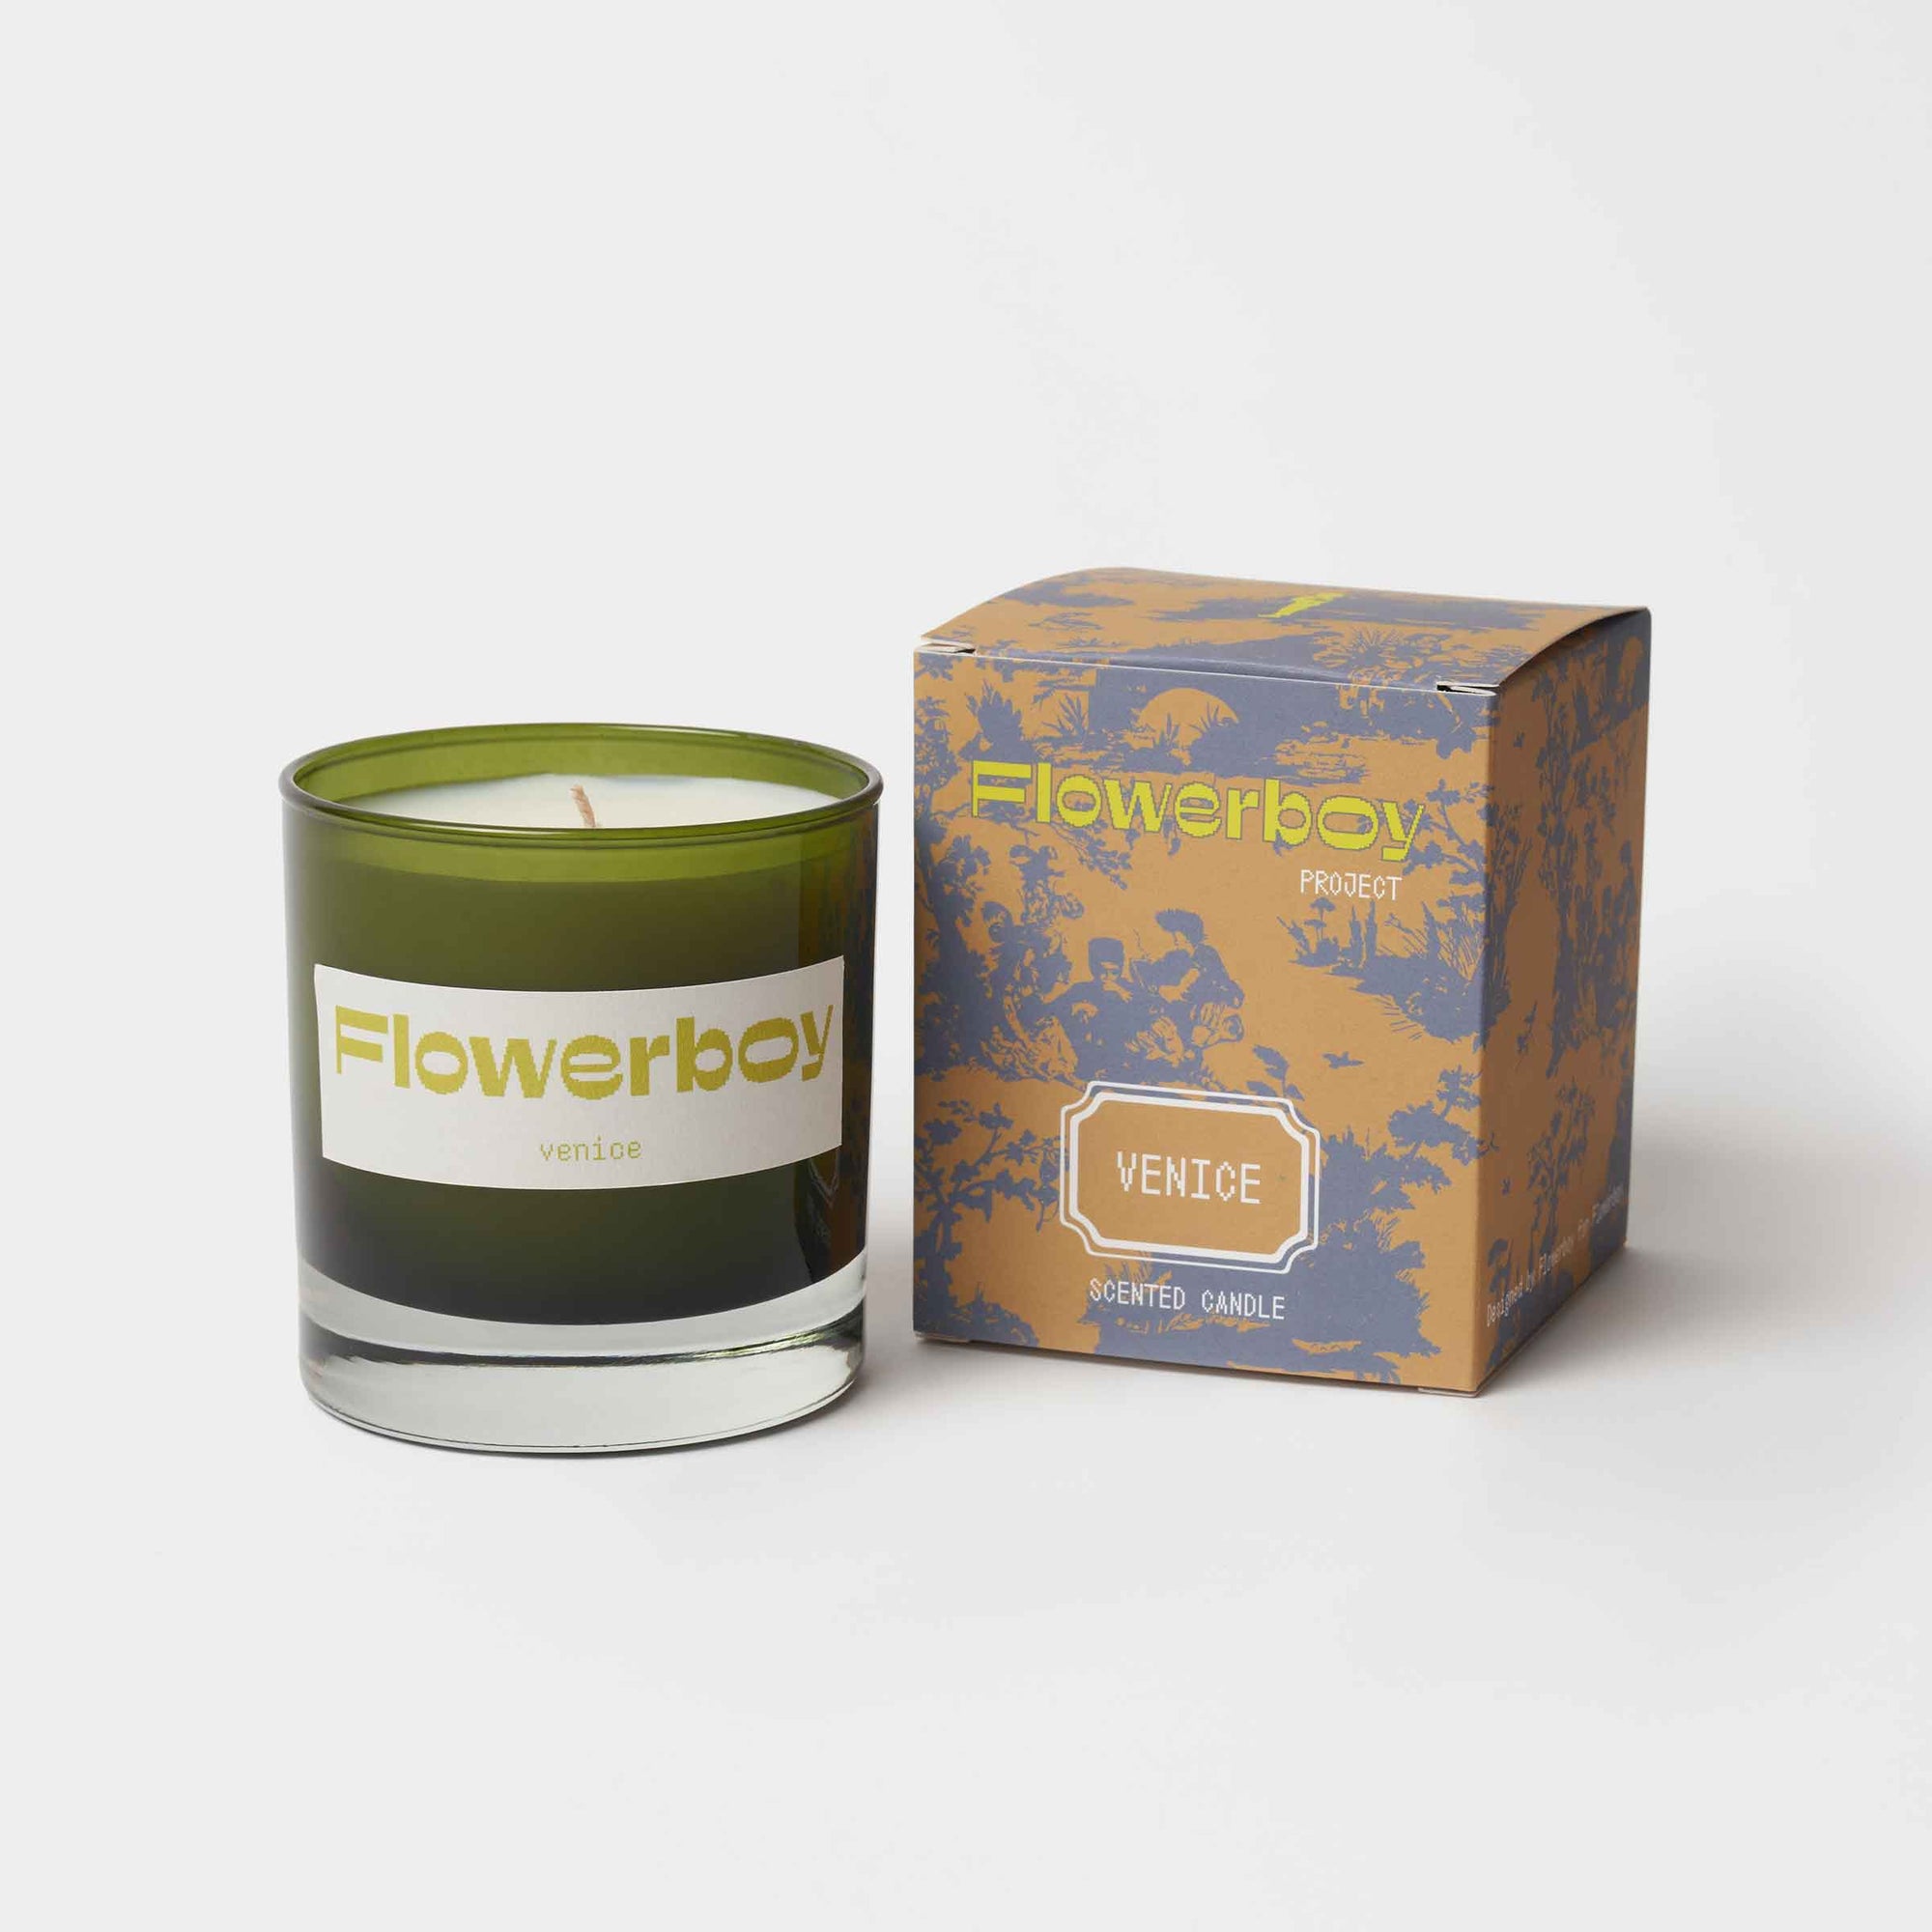 Flowerboy Project Candle | Venice